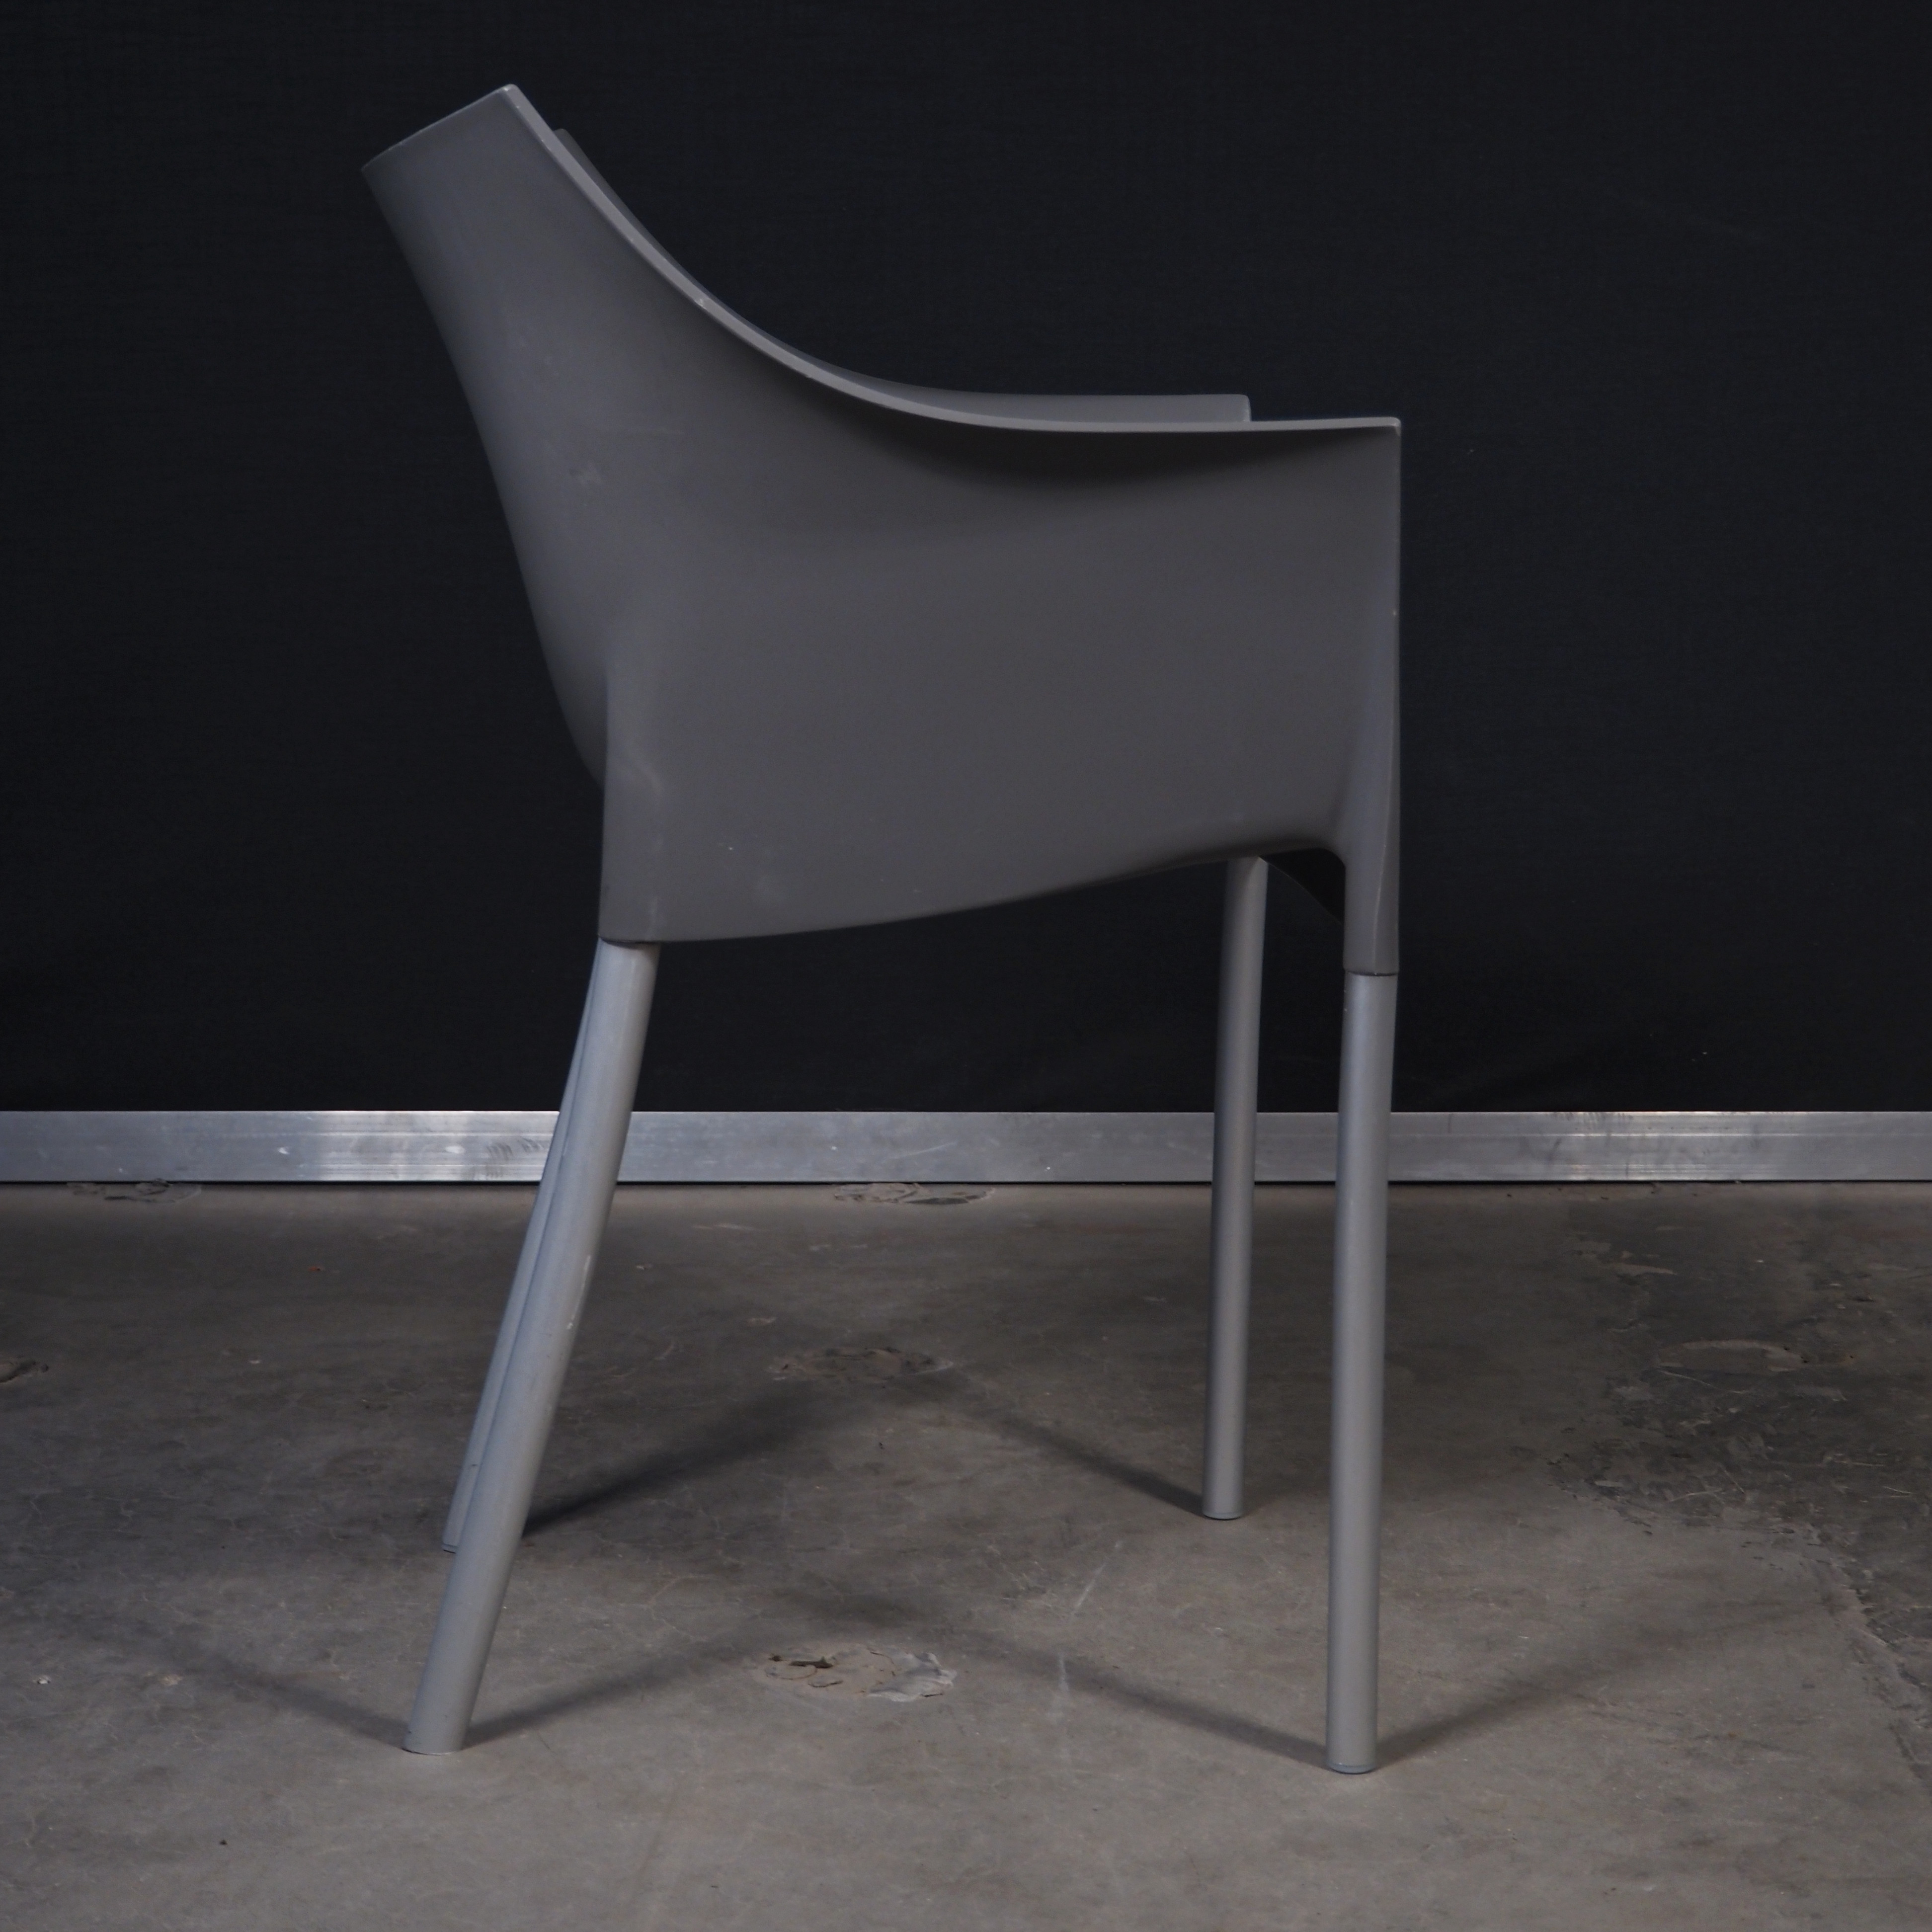 Armchair 'Dr. NO' by Philippe Starck for Kartell (ca. 1997) - Dark grey